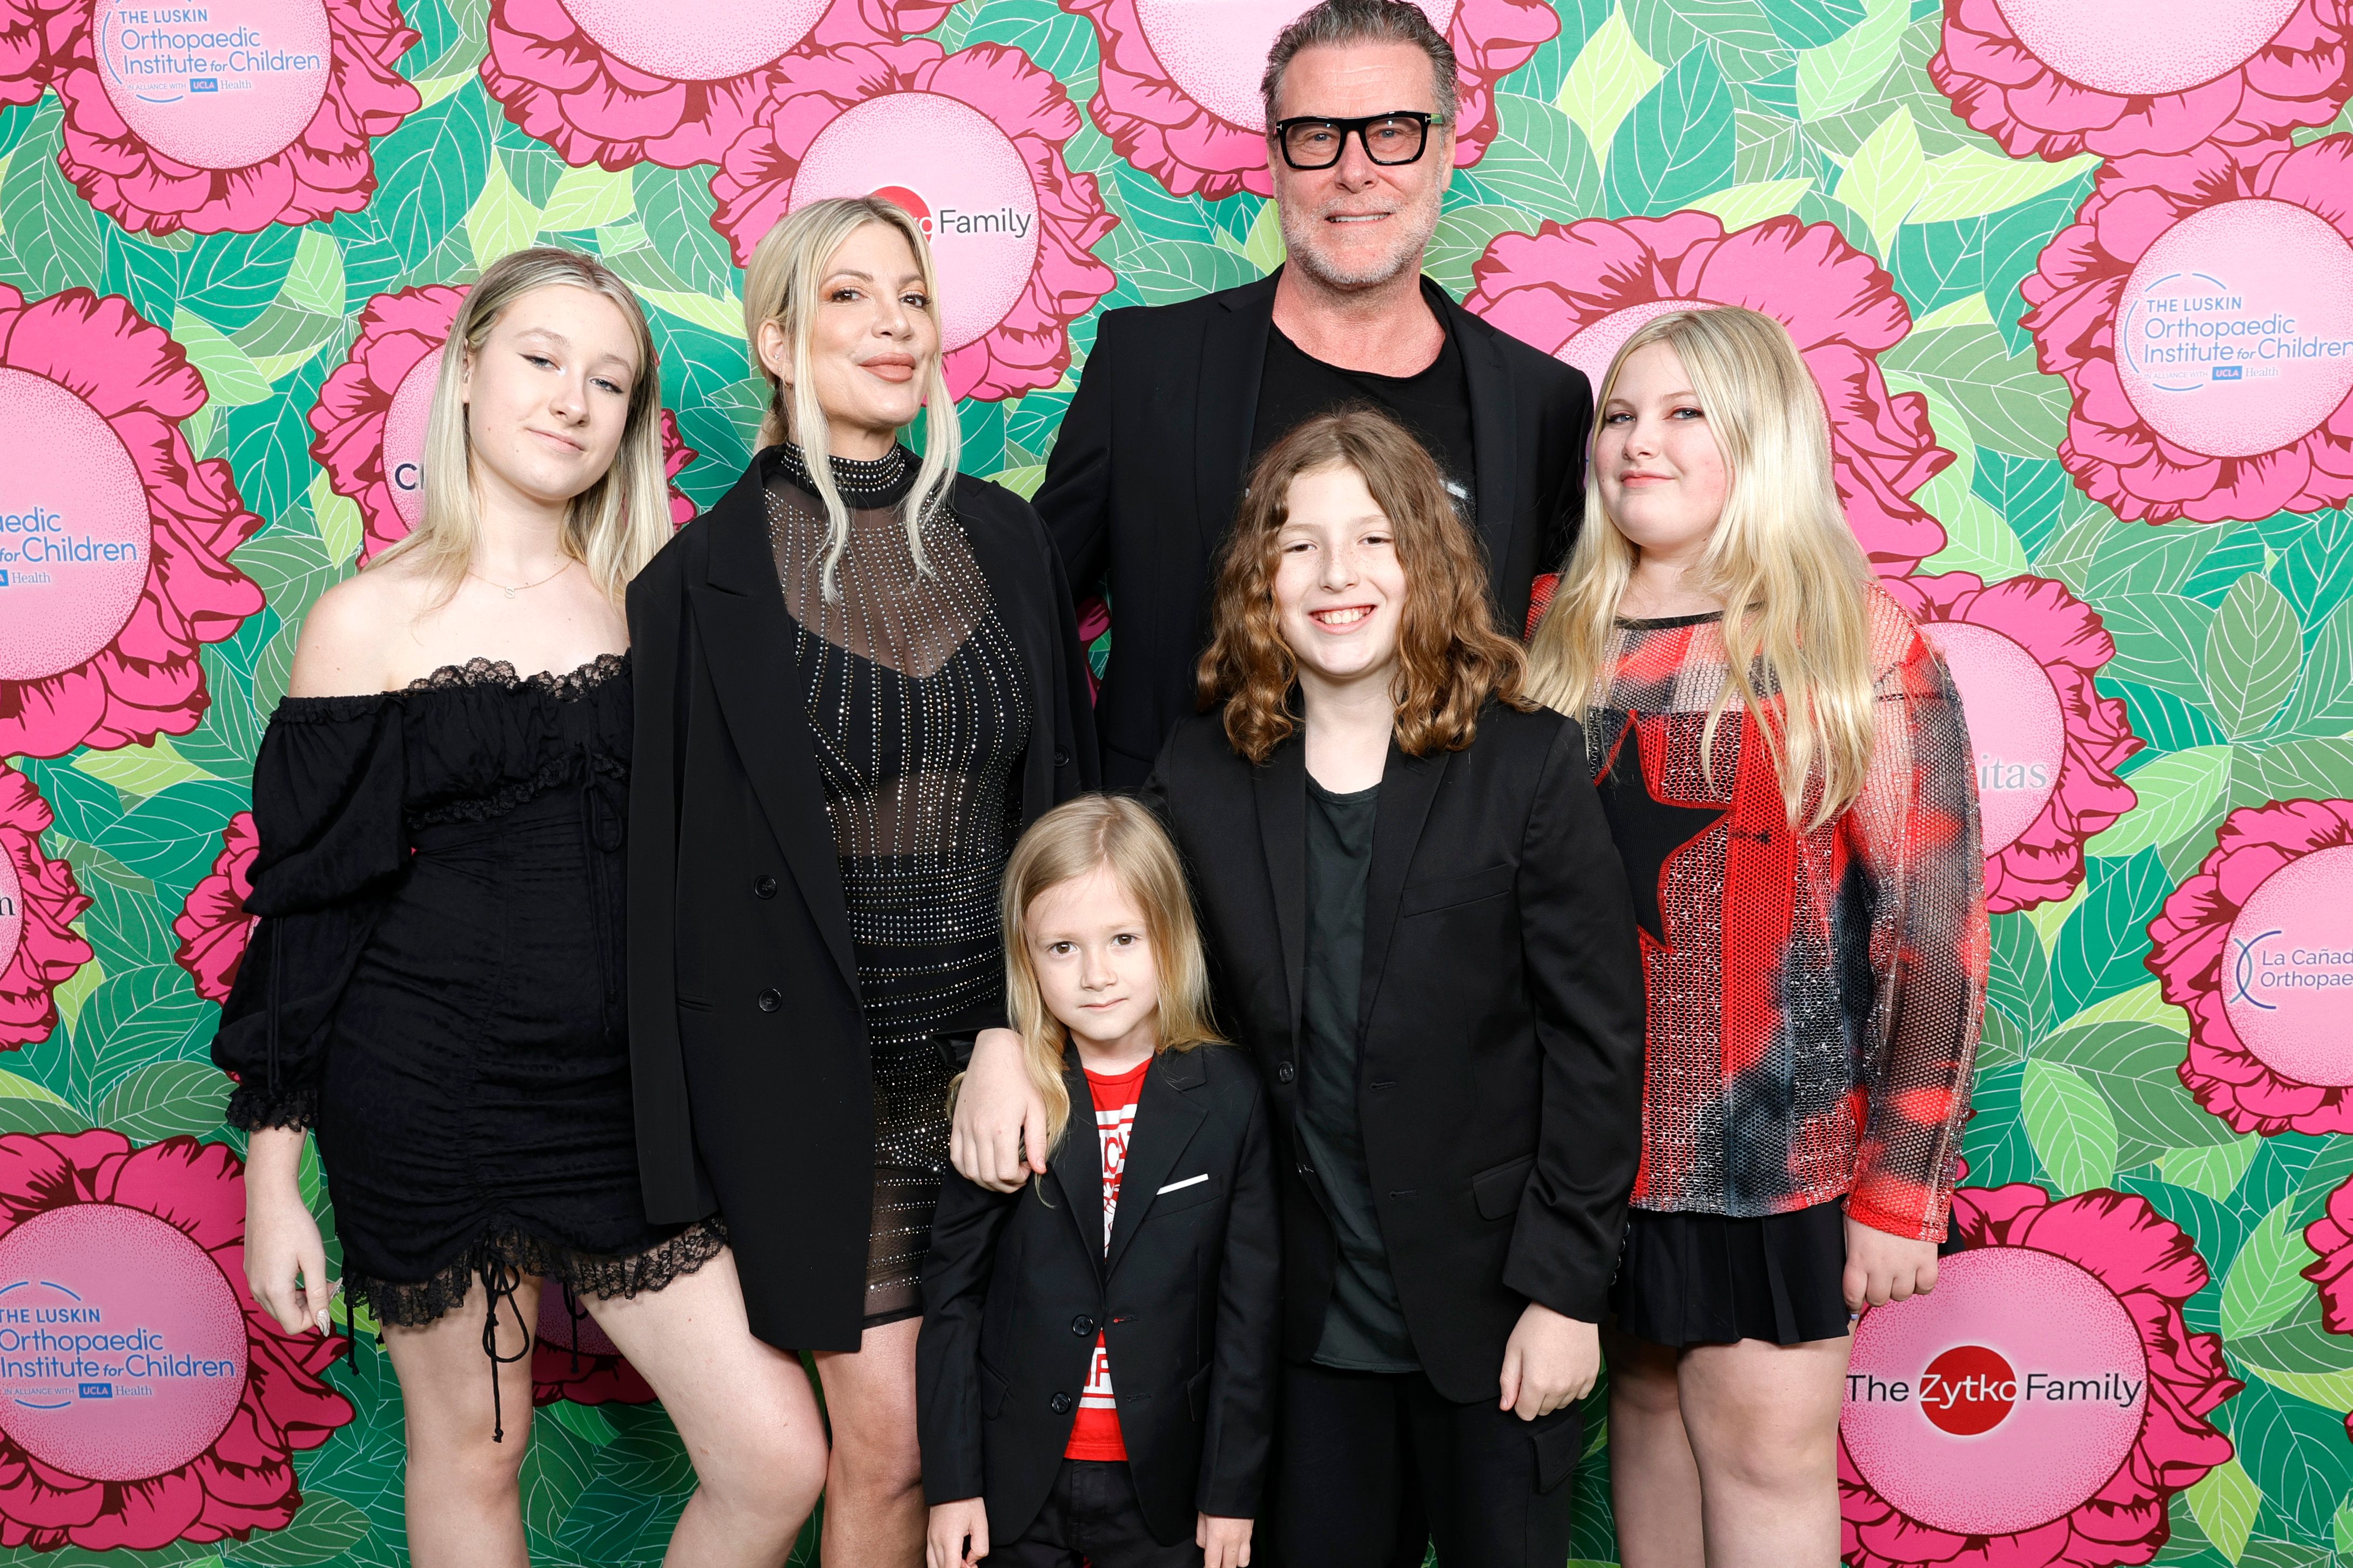 Stella Spelling, Tori Spelling, Beau Spelling, Dean McDermott, Finn Spelling, and Hattie Spelling during the Luskin Orthopaedic Institute for Children, Stand for Kids Gala at Universal Studios Hollywood on June 10, 2023, in Universal City, California. | Source: Getty Images